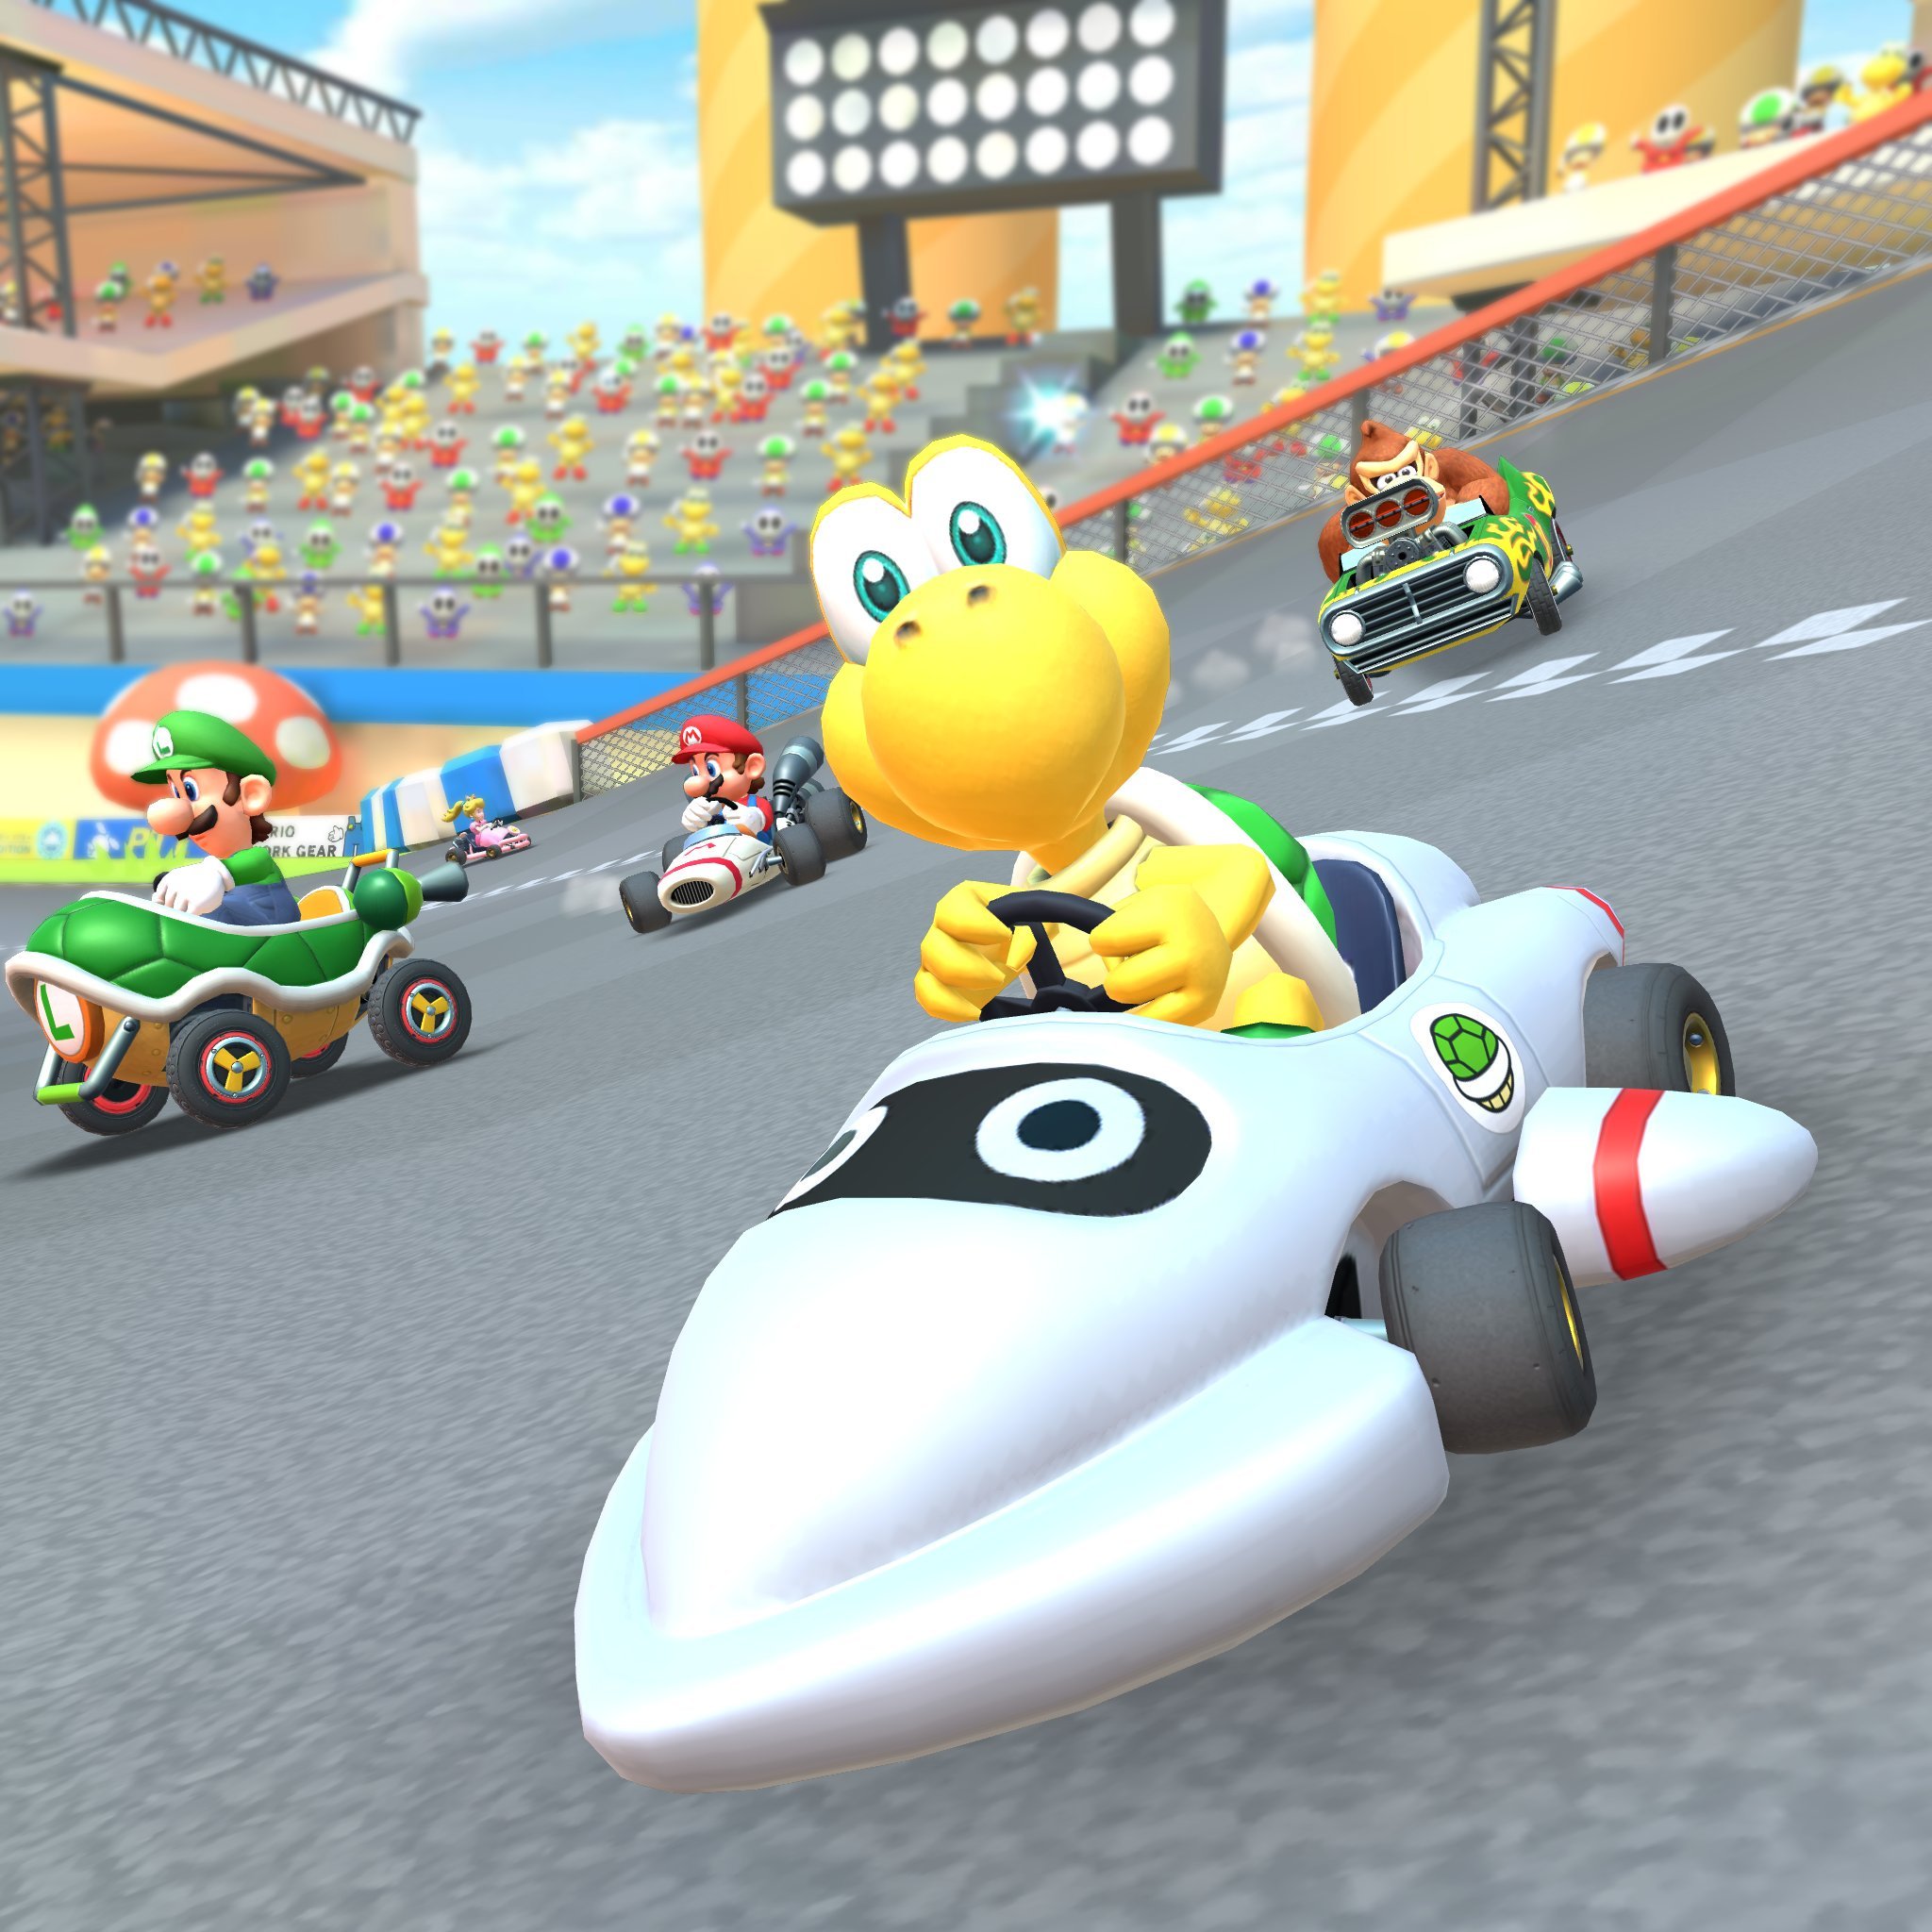 Mario Kart Tour Multiplayer Officially Launches on iPhone This Week